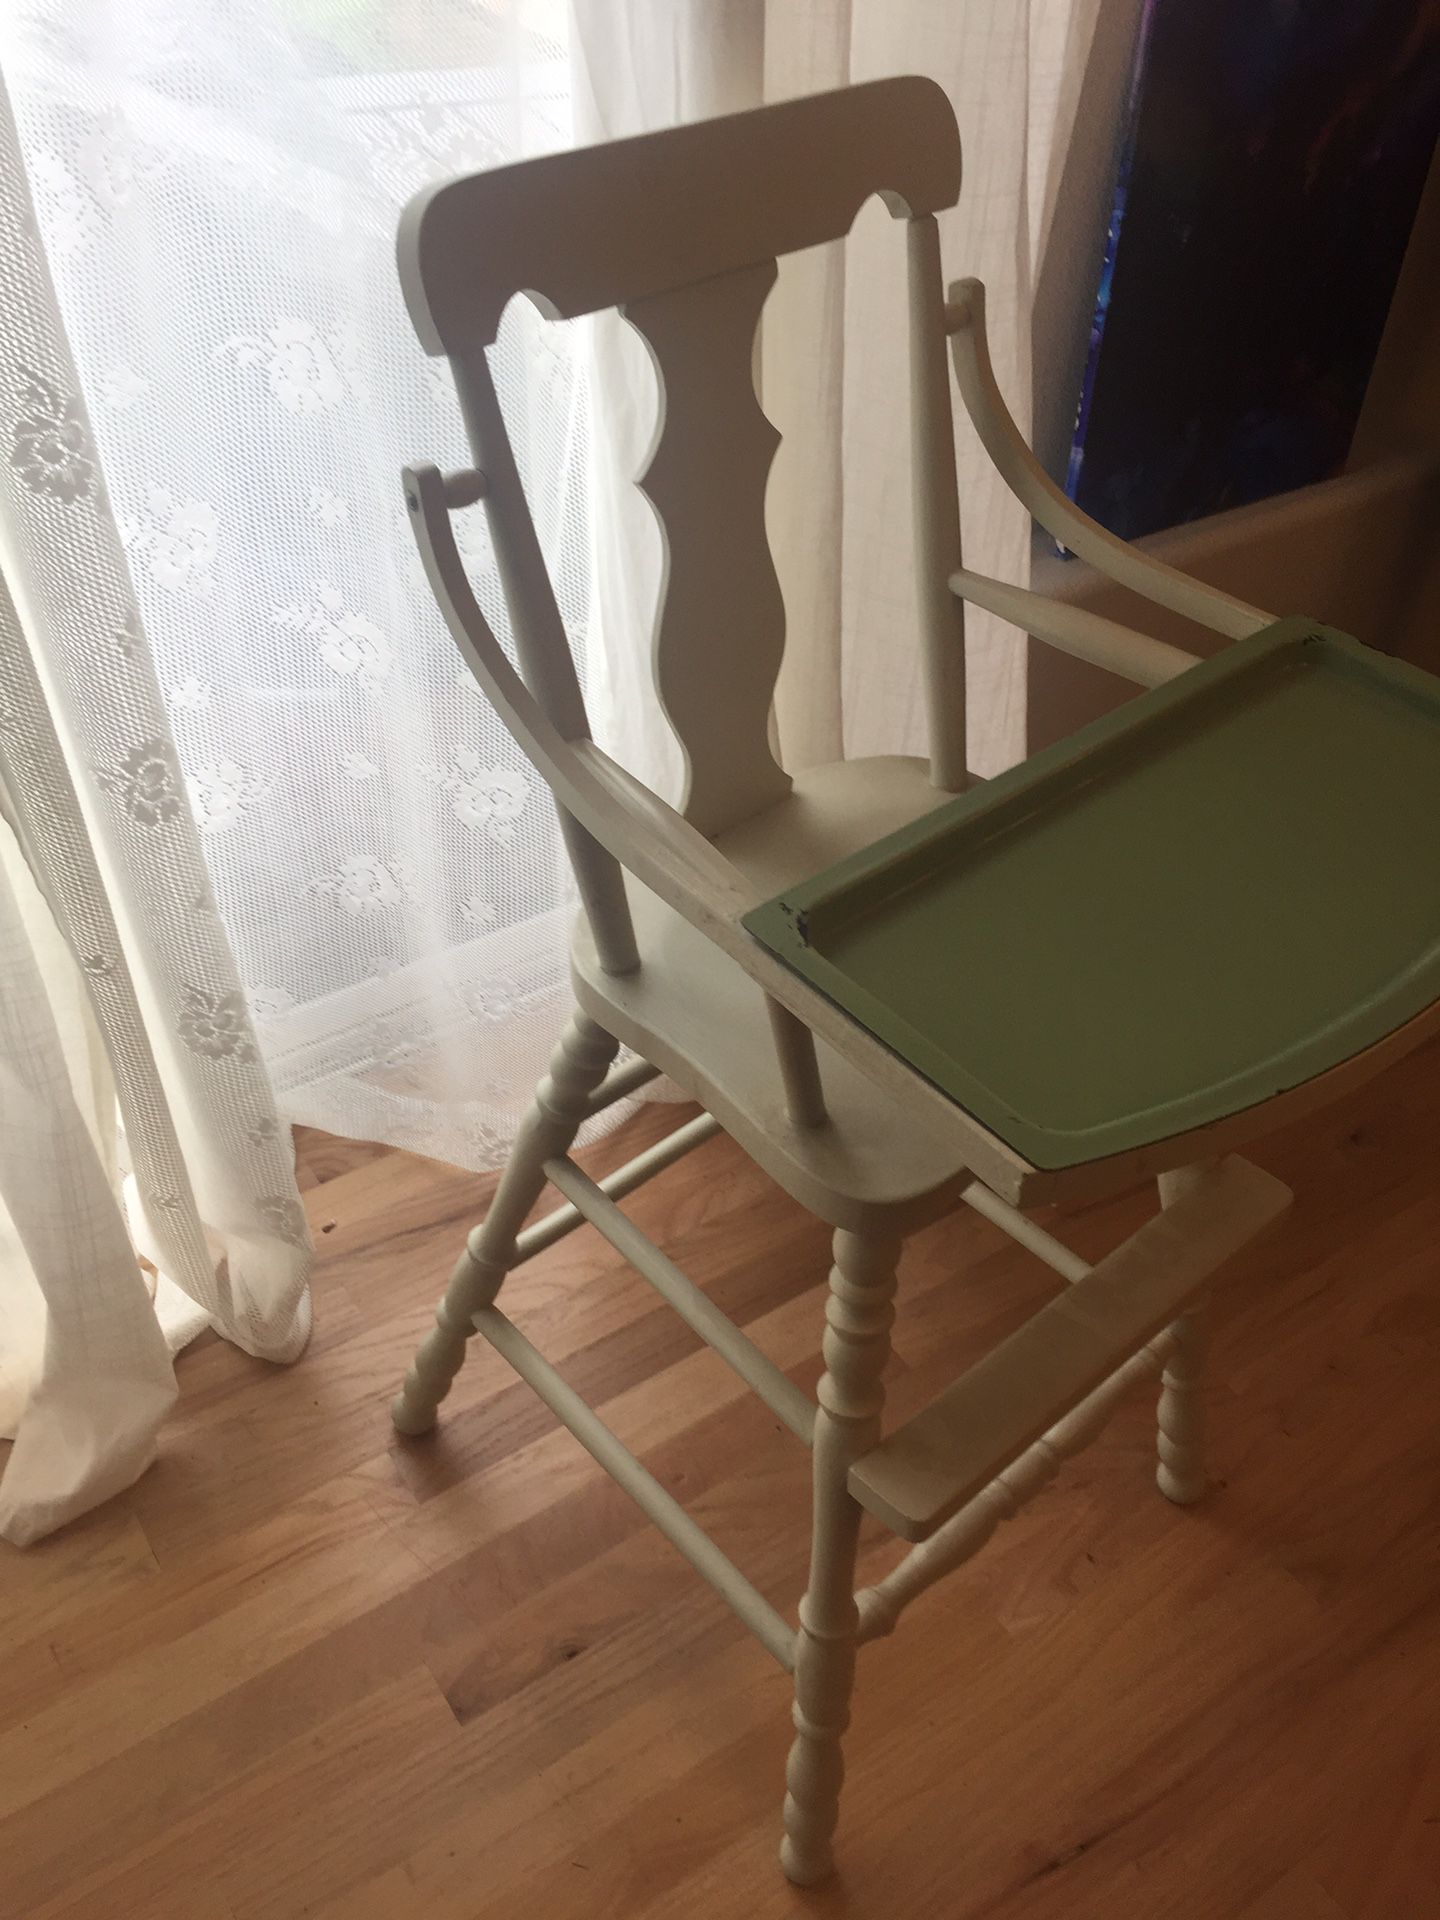 Antique baby high chair